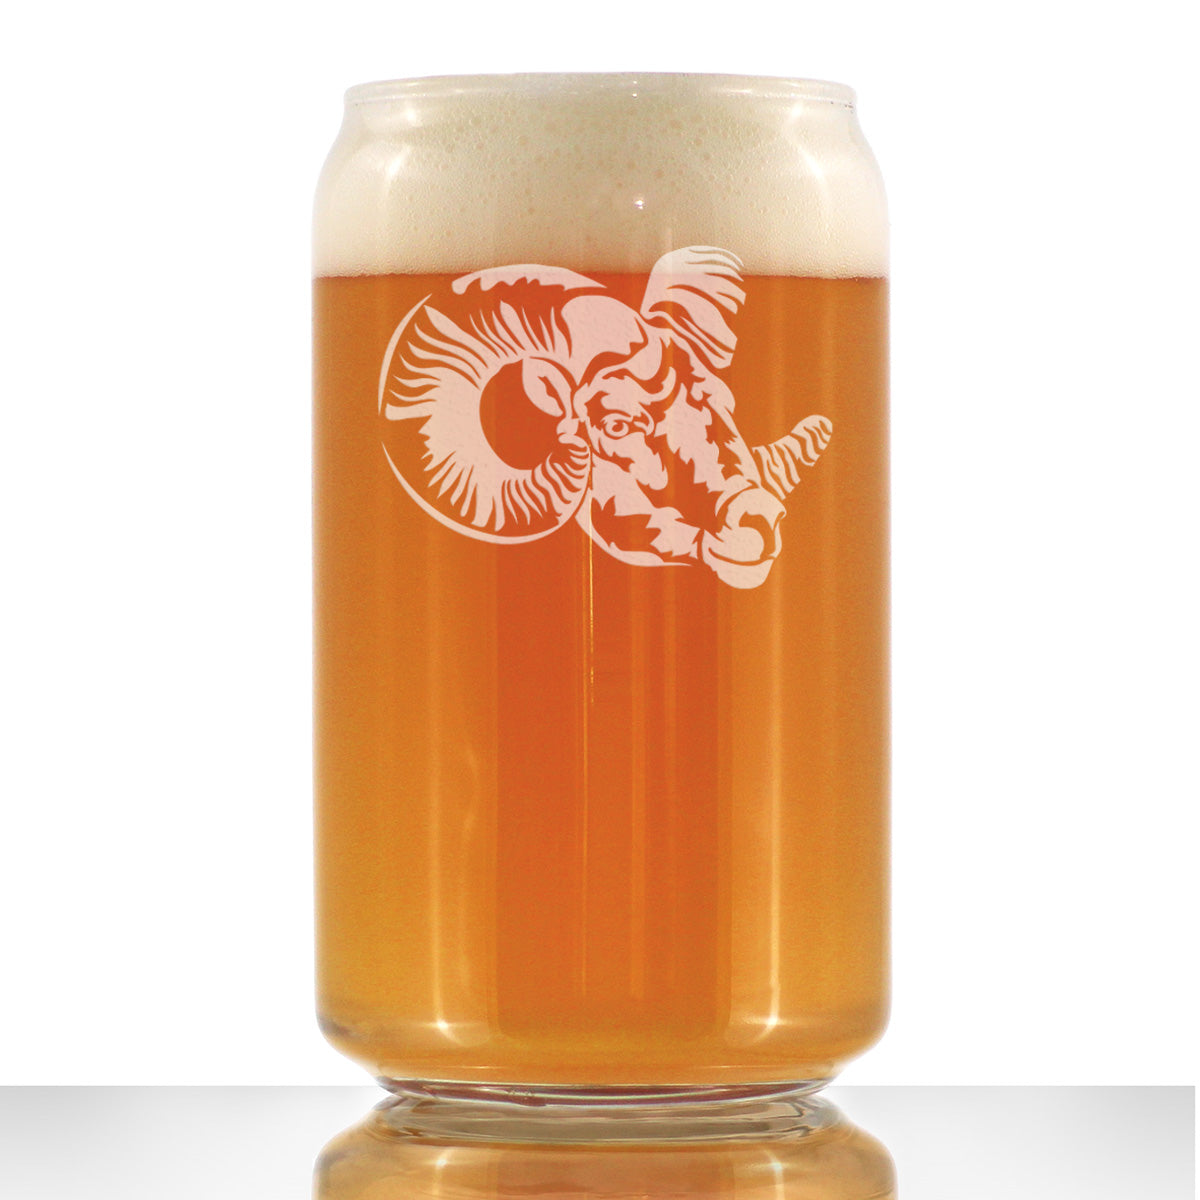 Ram Face Beer Can Pint Glass - Bighorn Sheep Themed Decor and Gifts for Rocky Mountain Animal Lovers - 16 Oz Glasses